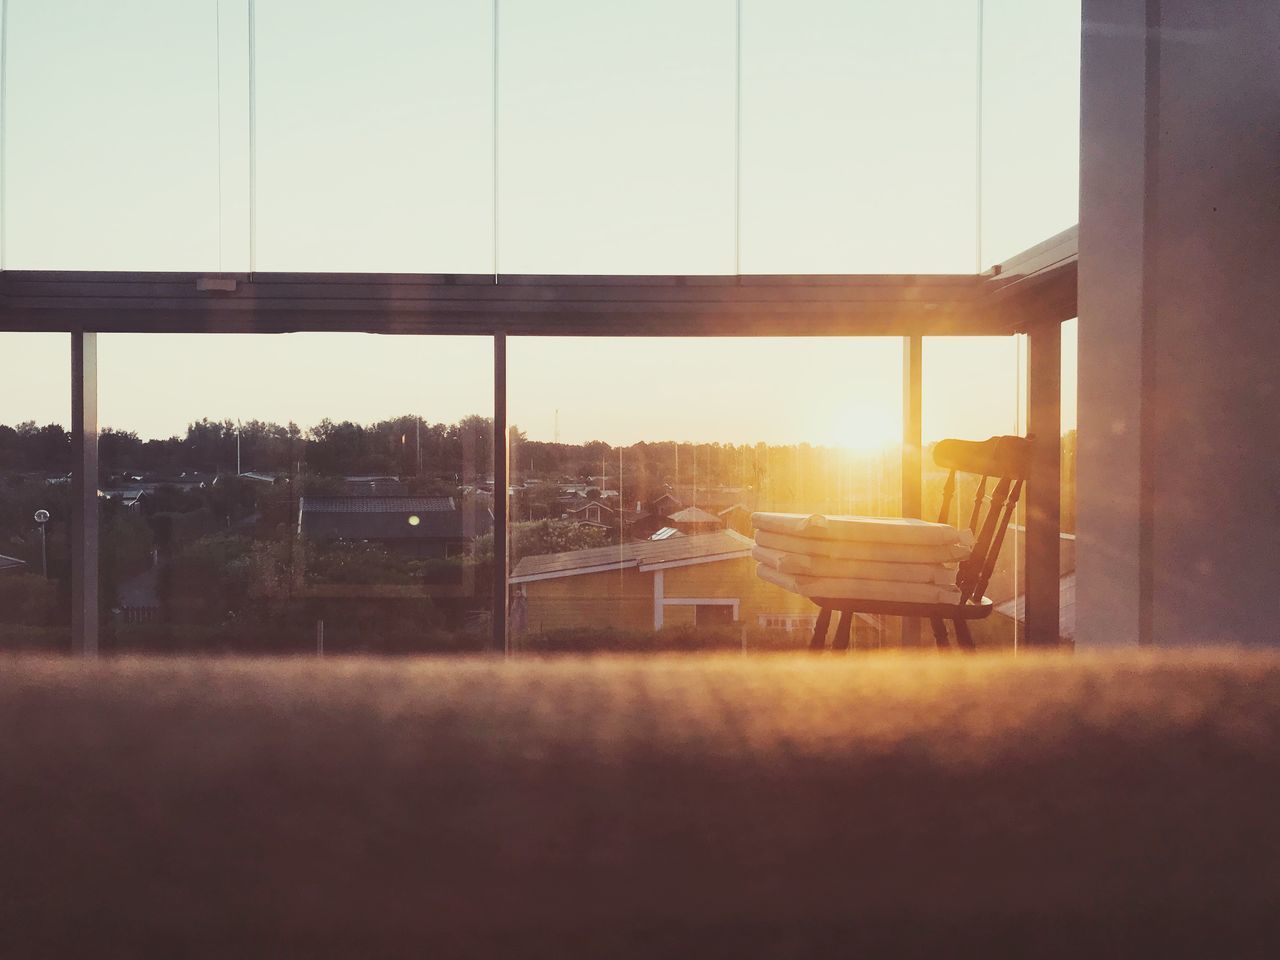 VIEW OF GLASS WINDOW AT SUNSET